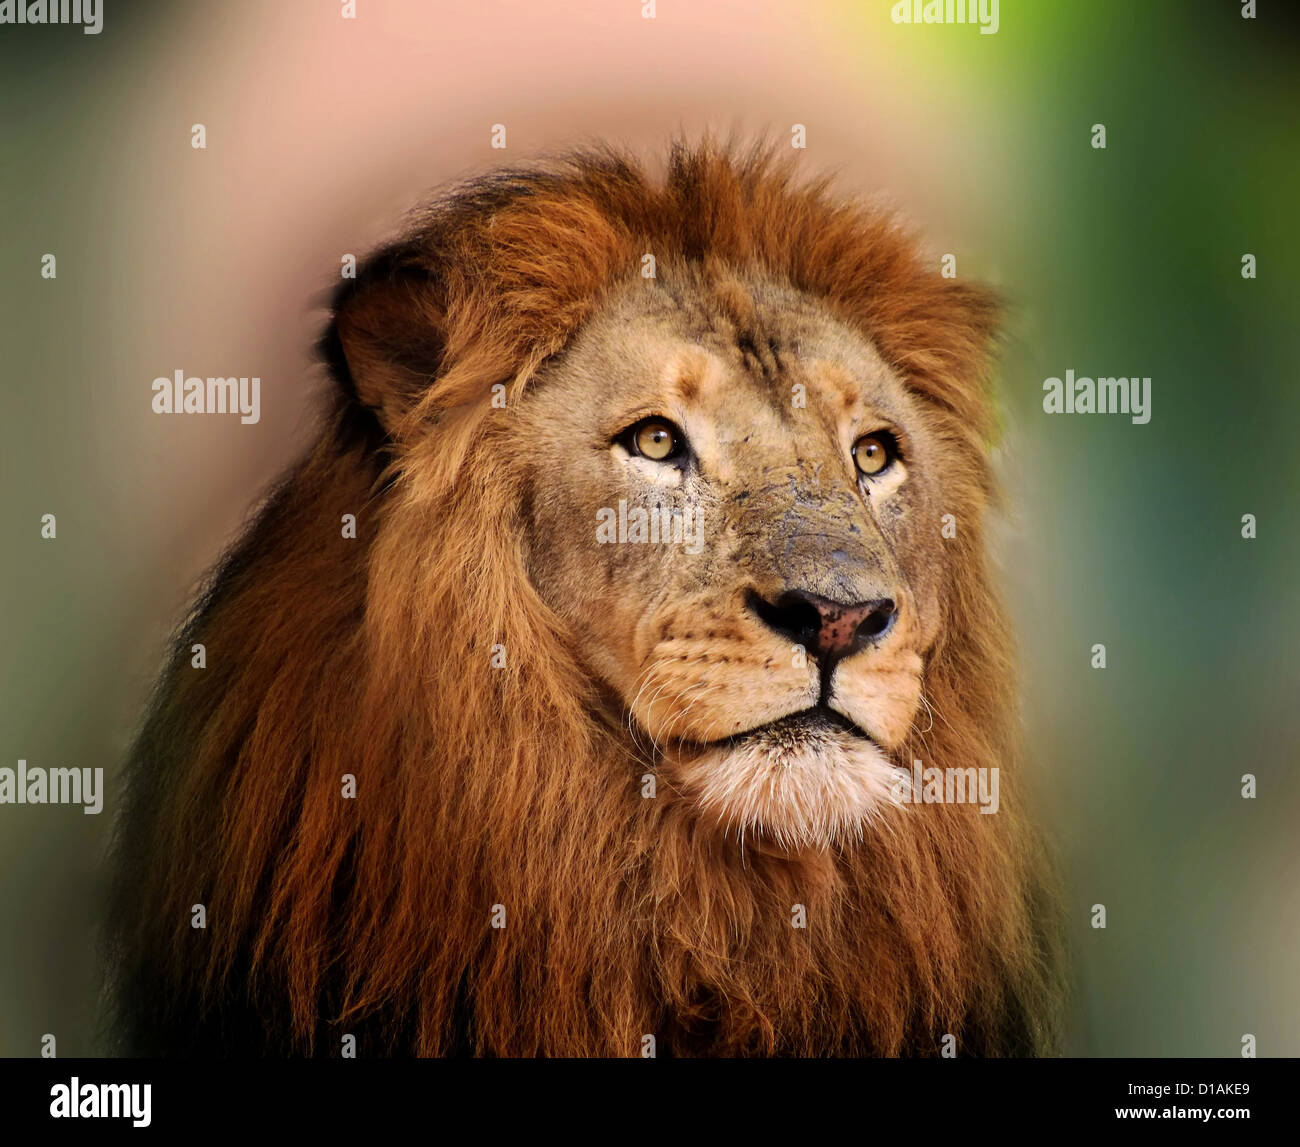 Royal King Lion with Majestic Face and Sharp Bright Eyes Stock Photo